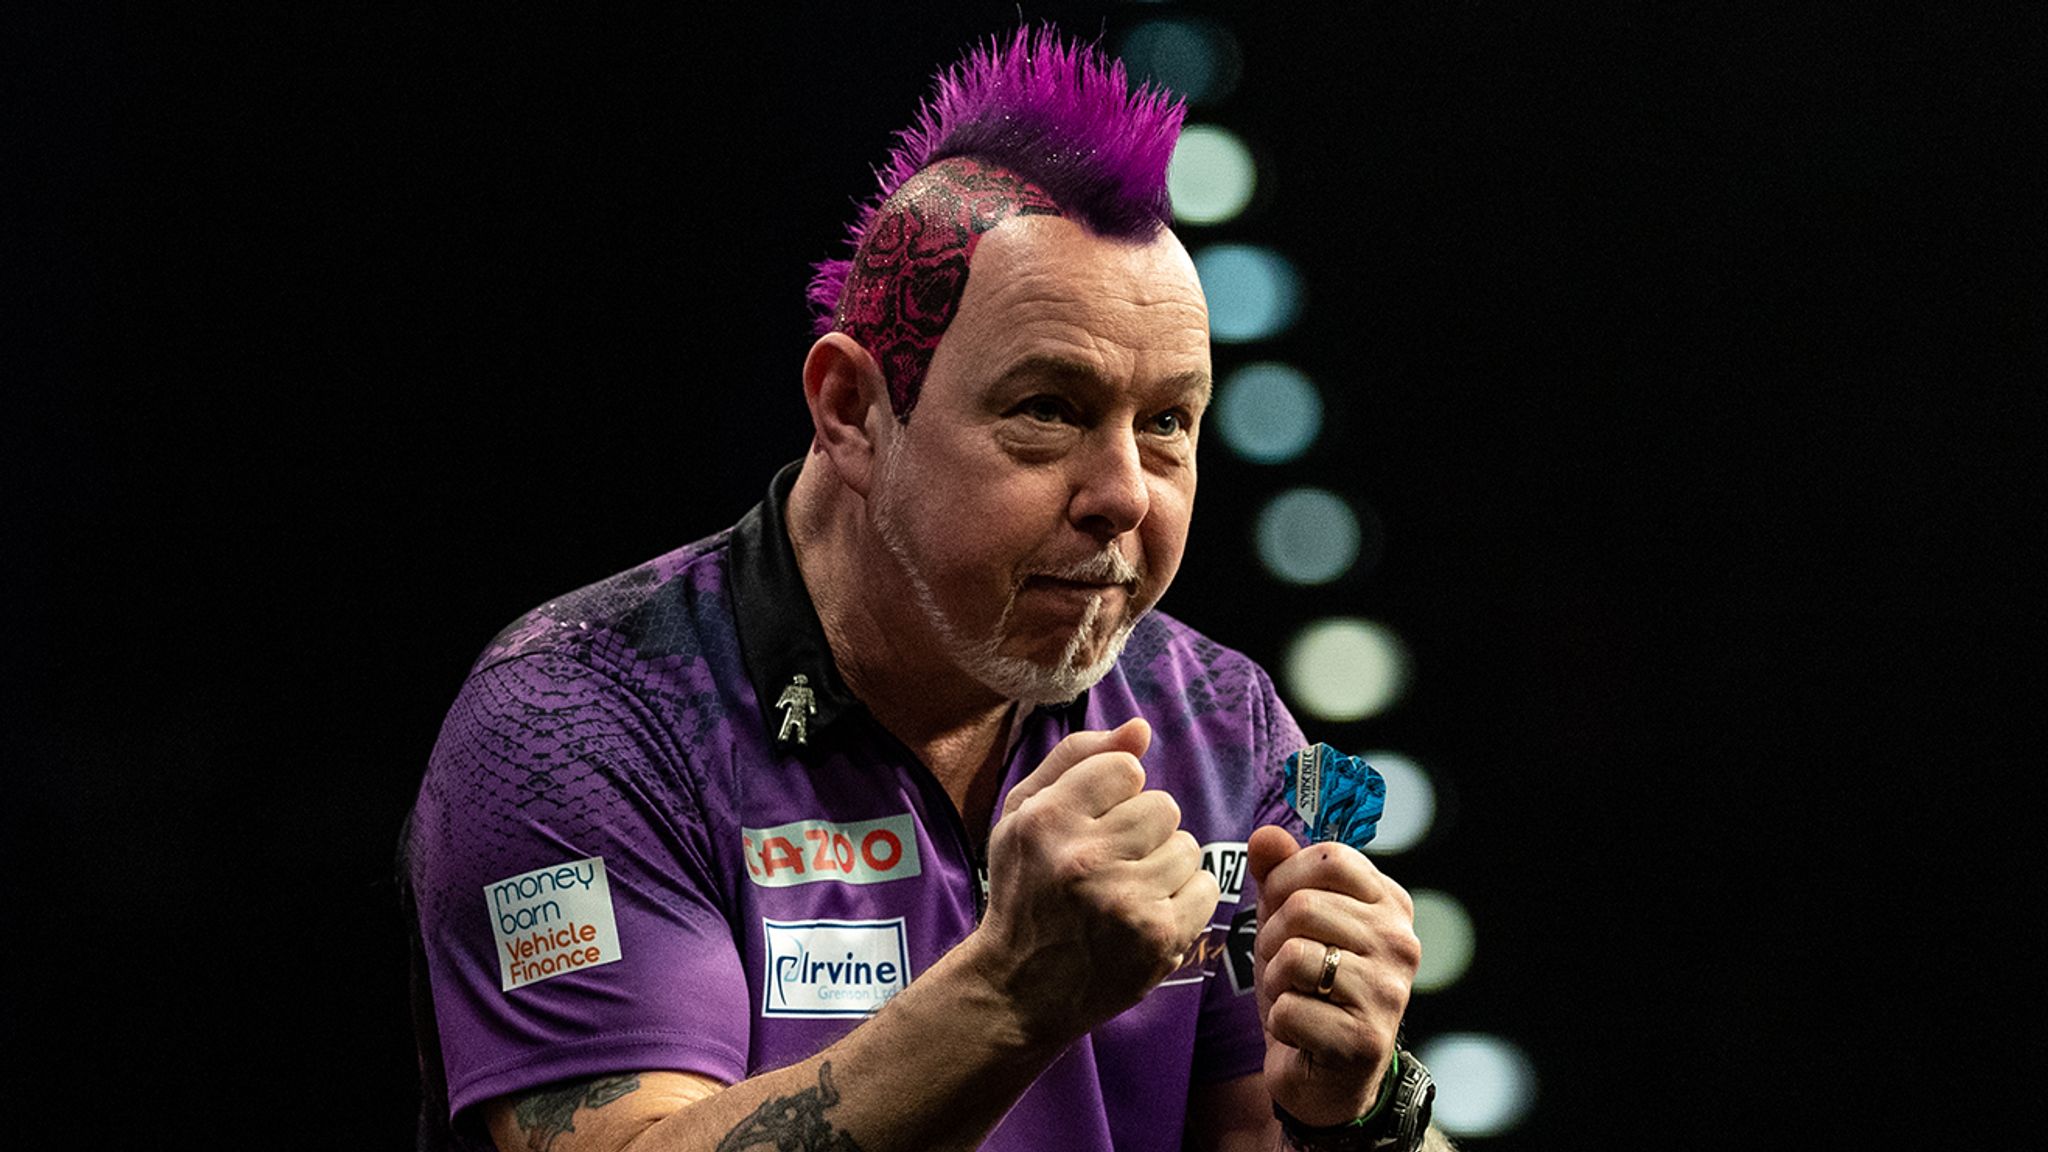 Premier Darts: Peter Wright feels Night 10 was 'turning point' as he looks to stay in play-off mix | Darts News | Sky Sports